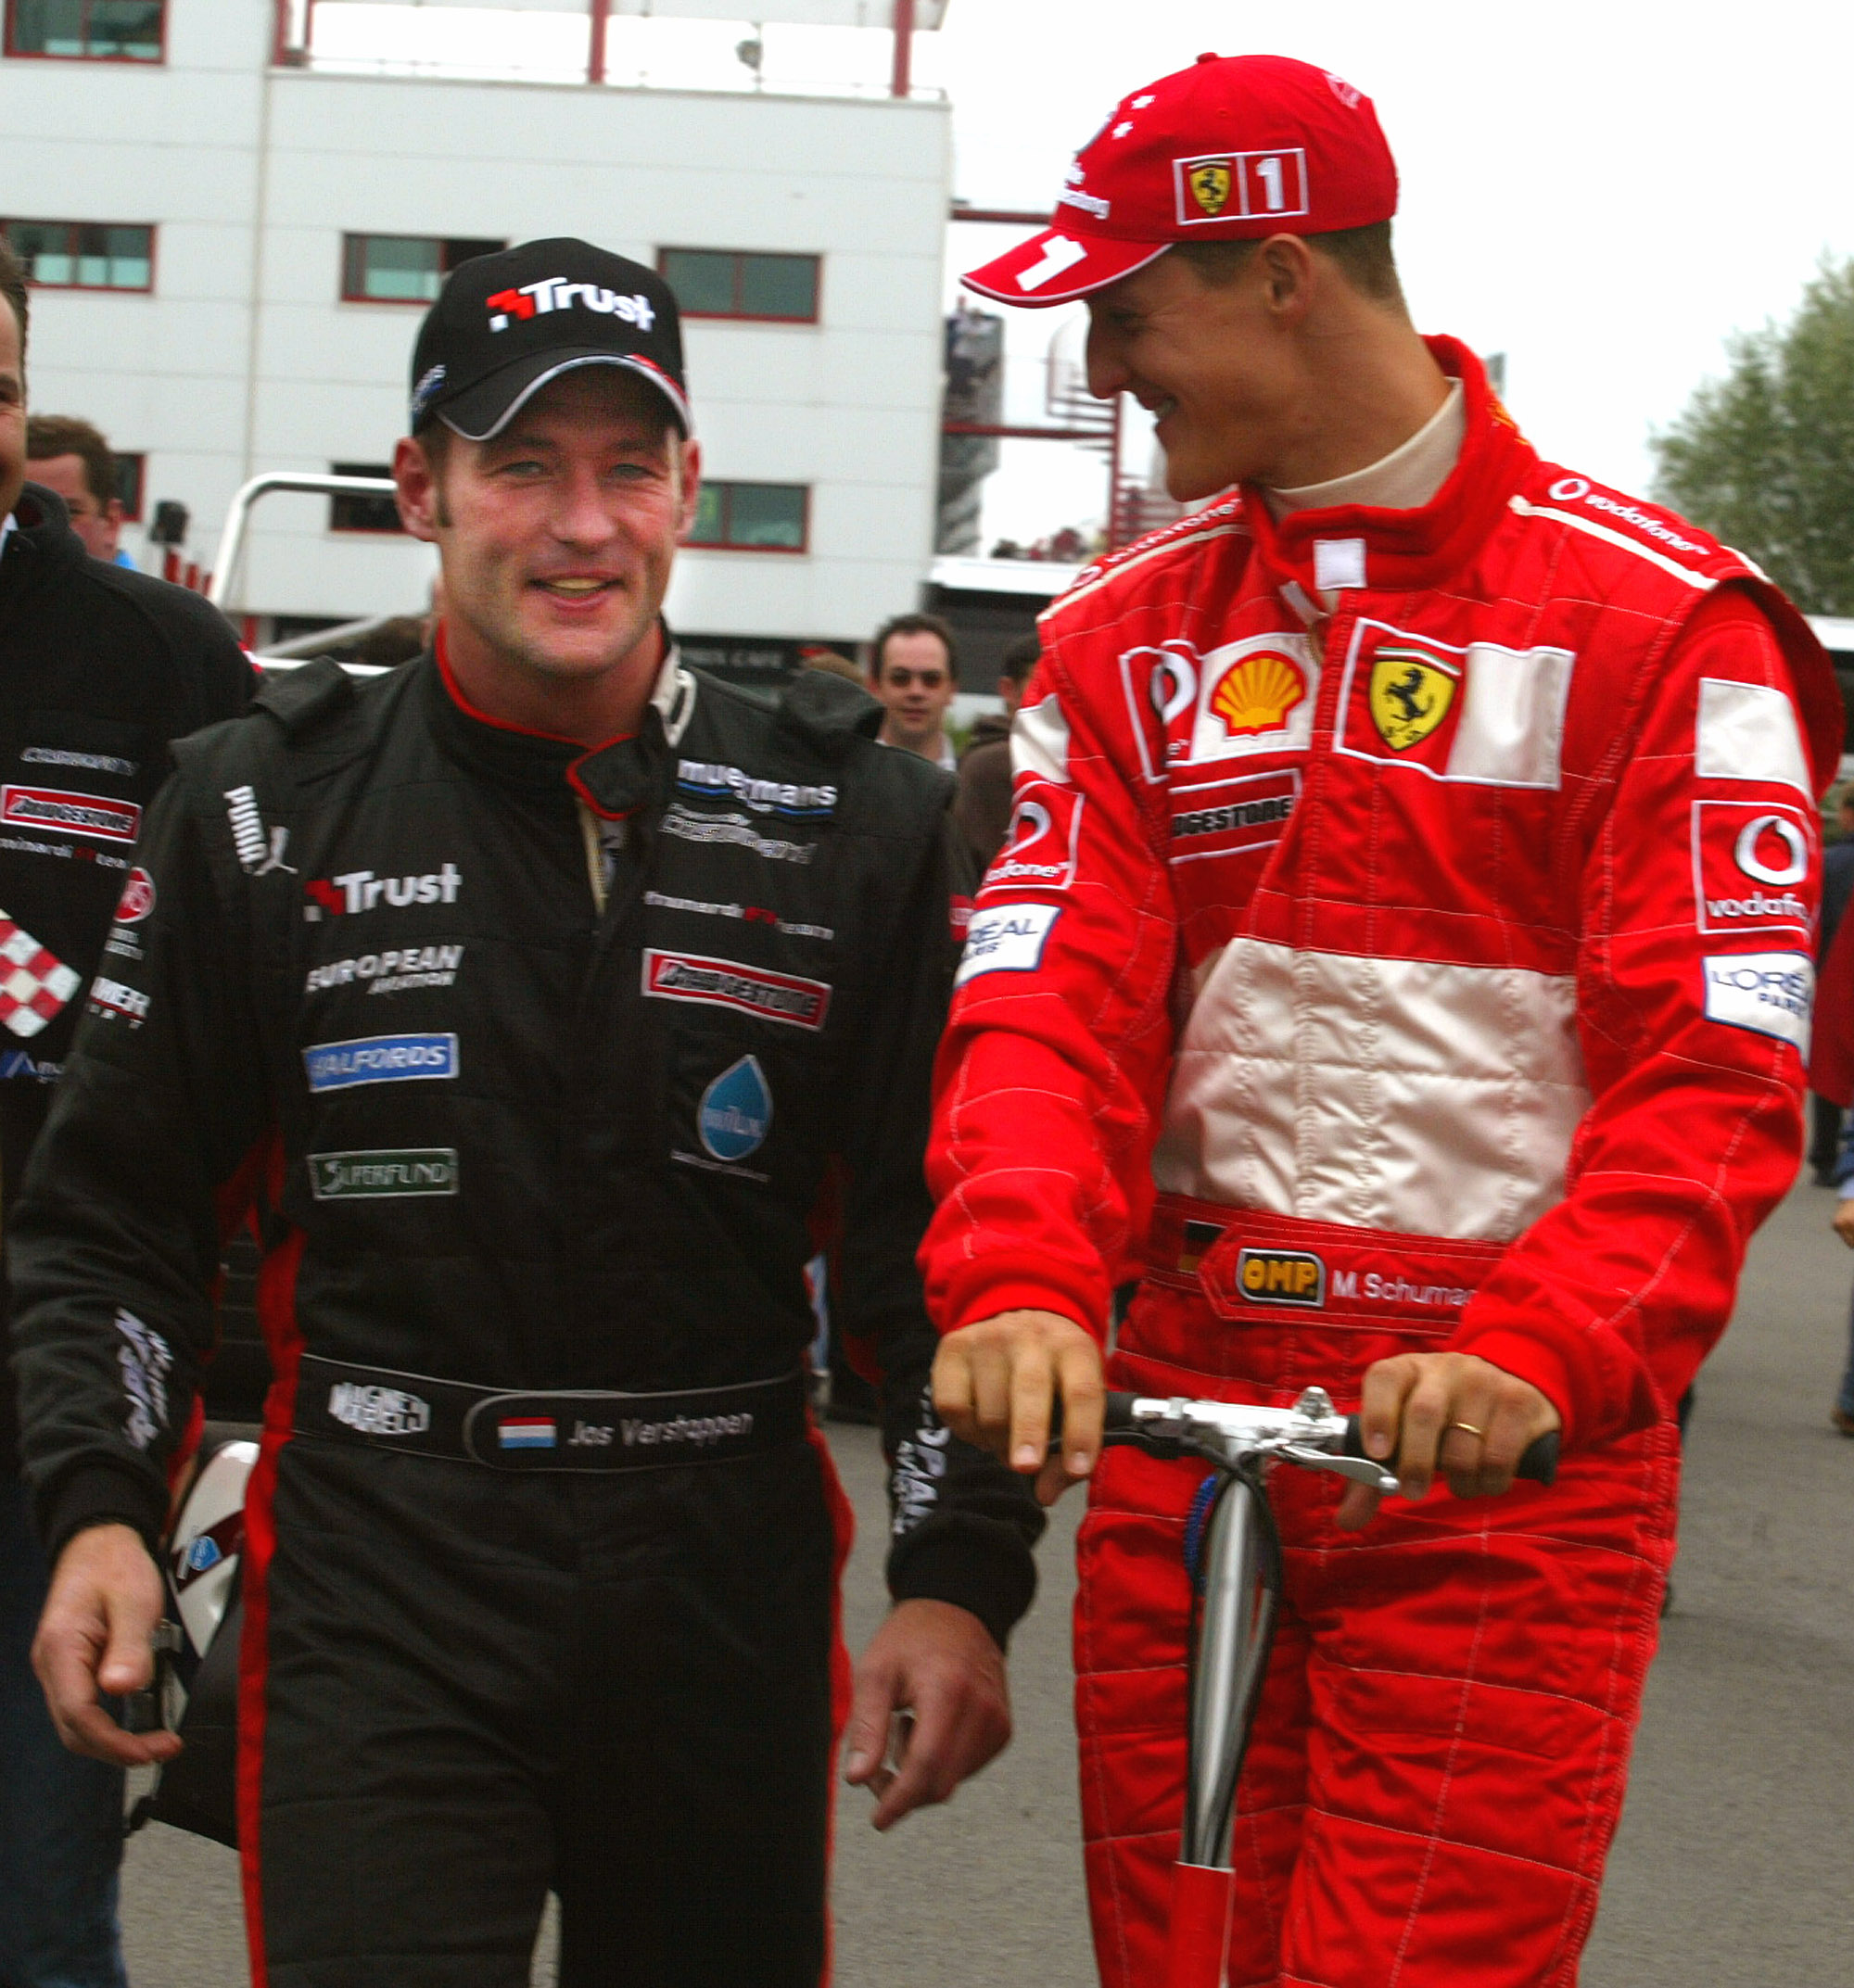 Michael Schumacher congratulates his friend Jos Verstappen on setting overnight pole position in the first qualifying